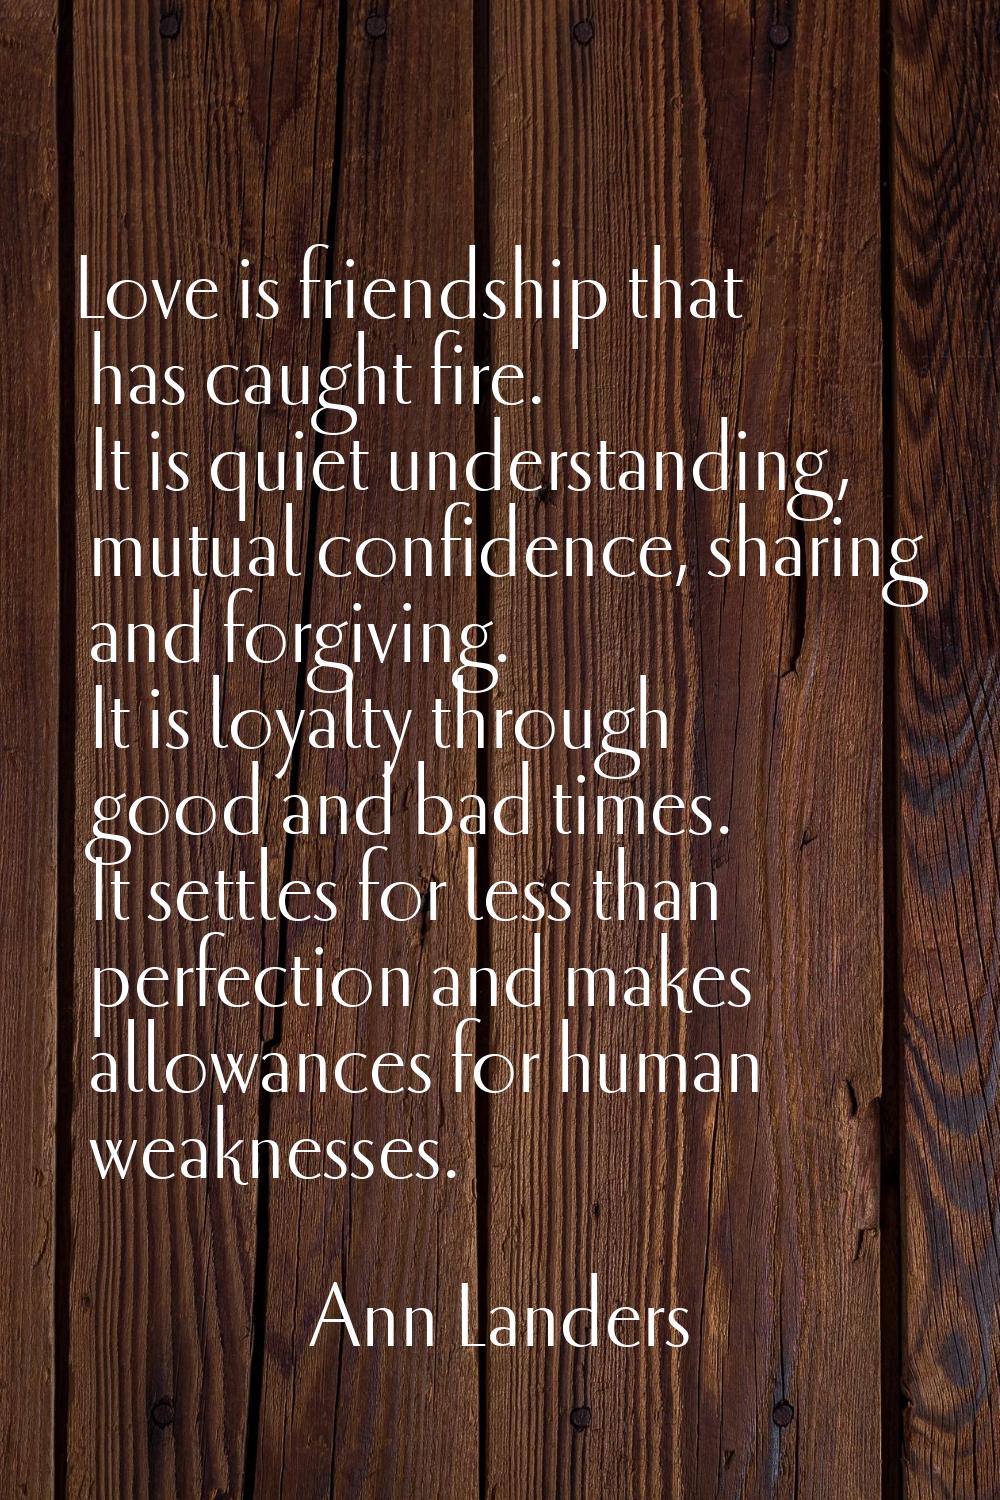 Love is friendship that has caught fire. It is quiet understanding, mutual confidence, sharing and 